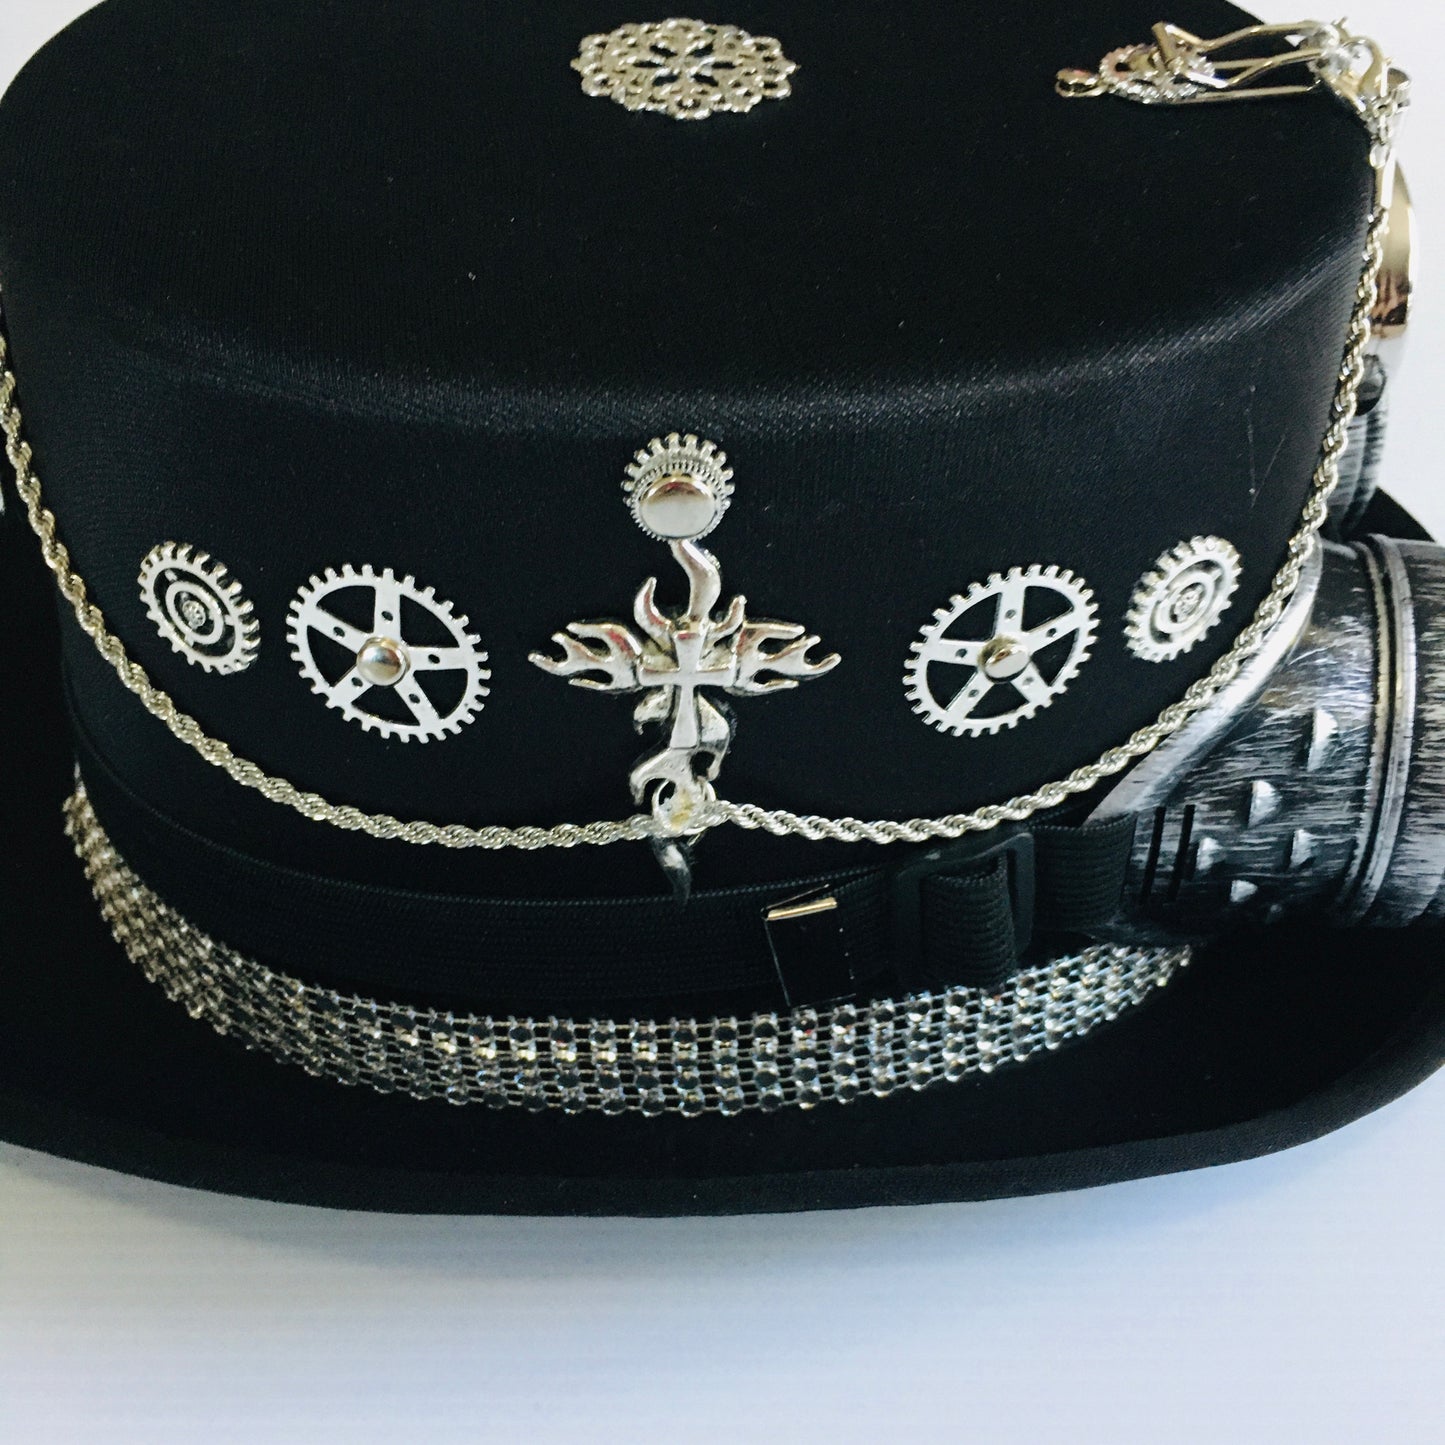 Steampunk  Style  black Top Hat clock and goggles (Item #32)